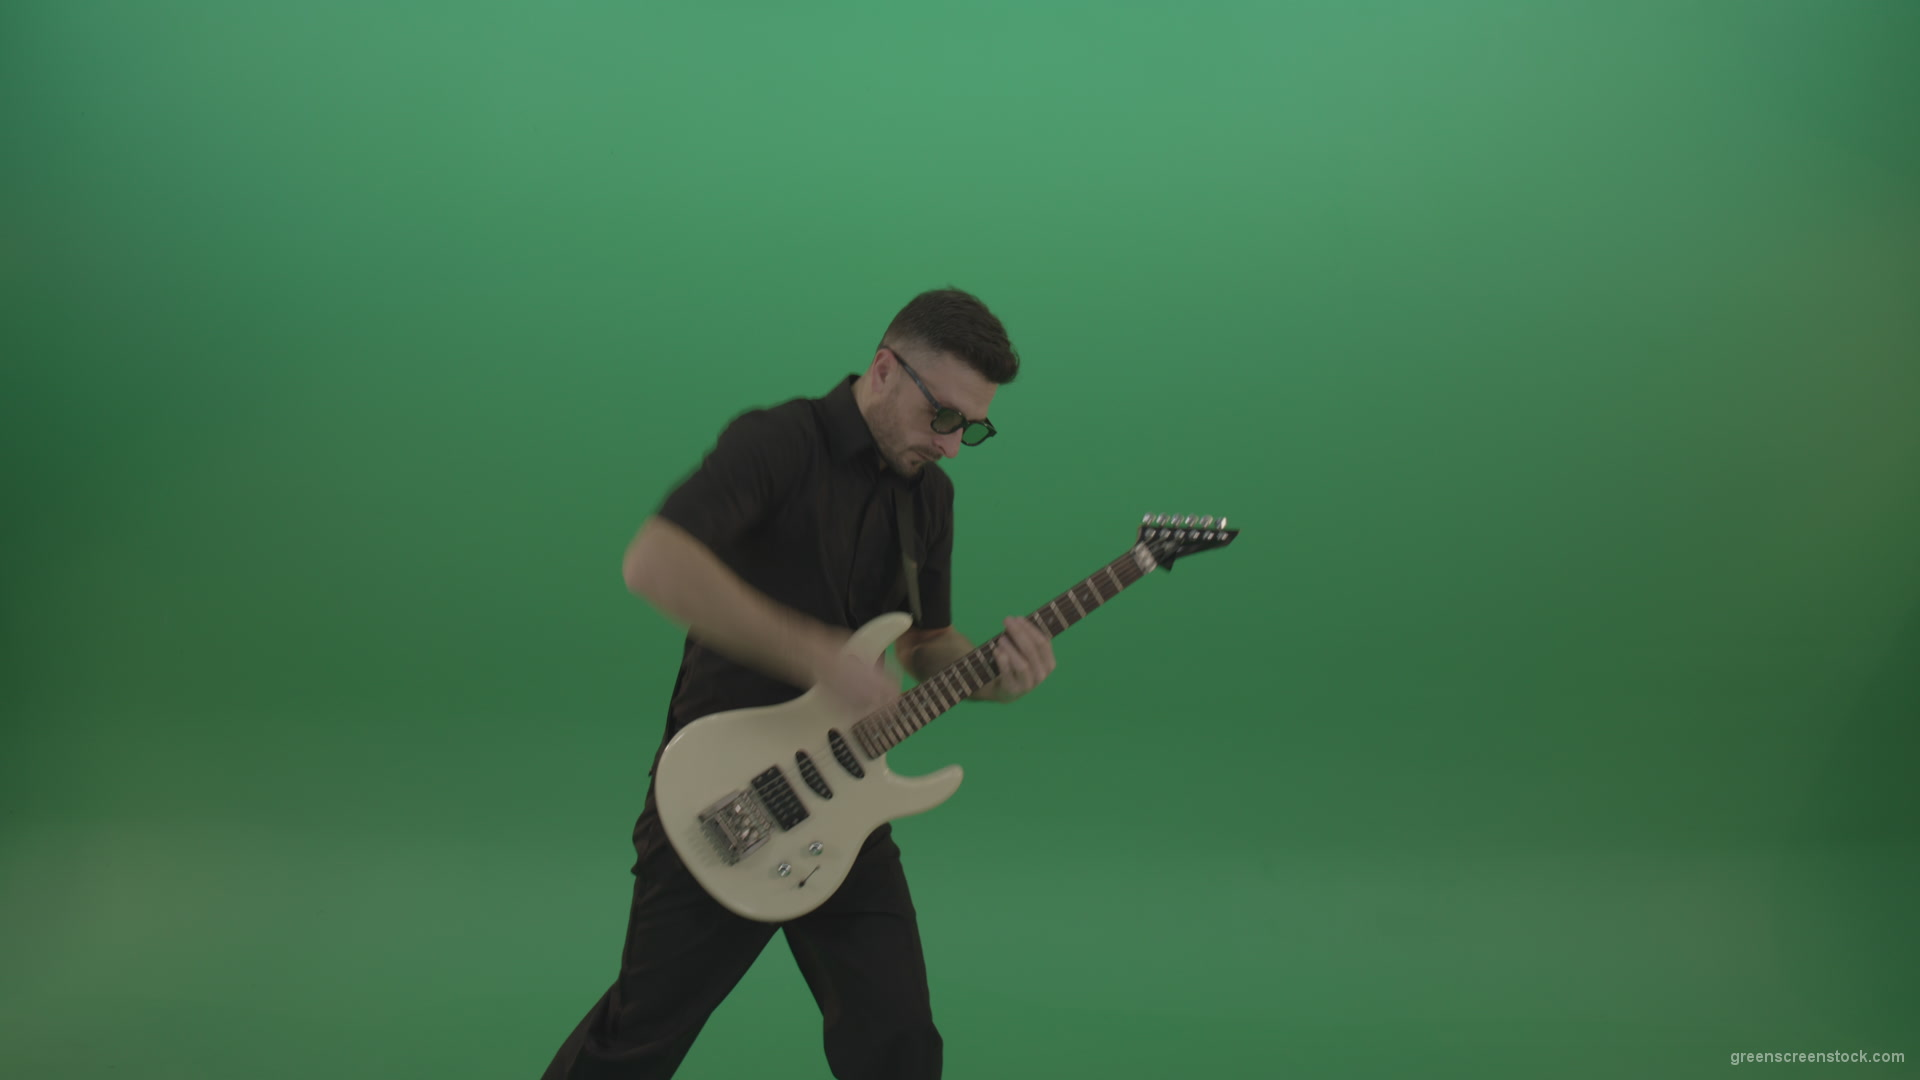 Man-in-black-costume-virtuoso-play-white-electro-rythm-guitar-isolated-on-green-screen_004 Green Screen Stock